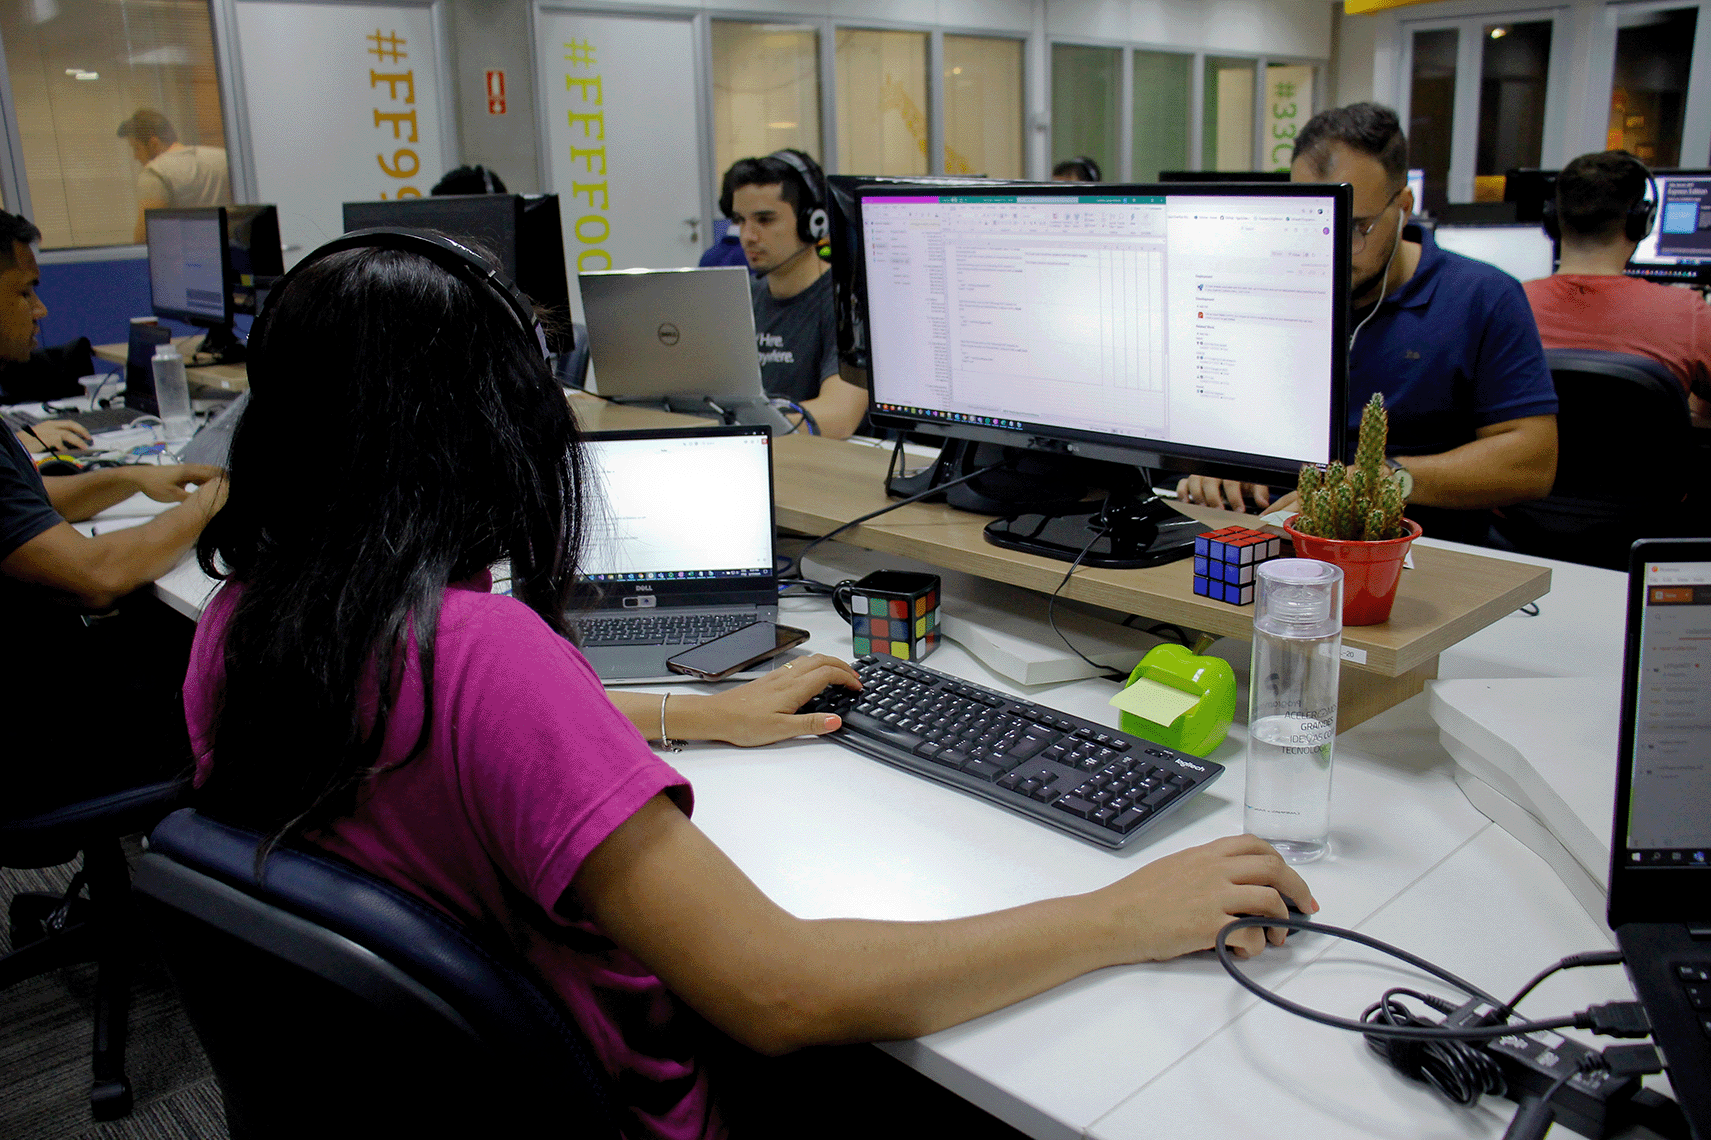 Young male and female workers checking data in office with laptops and monitor screens